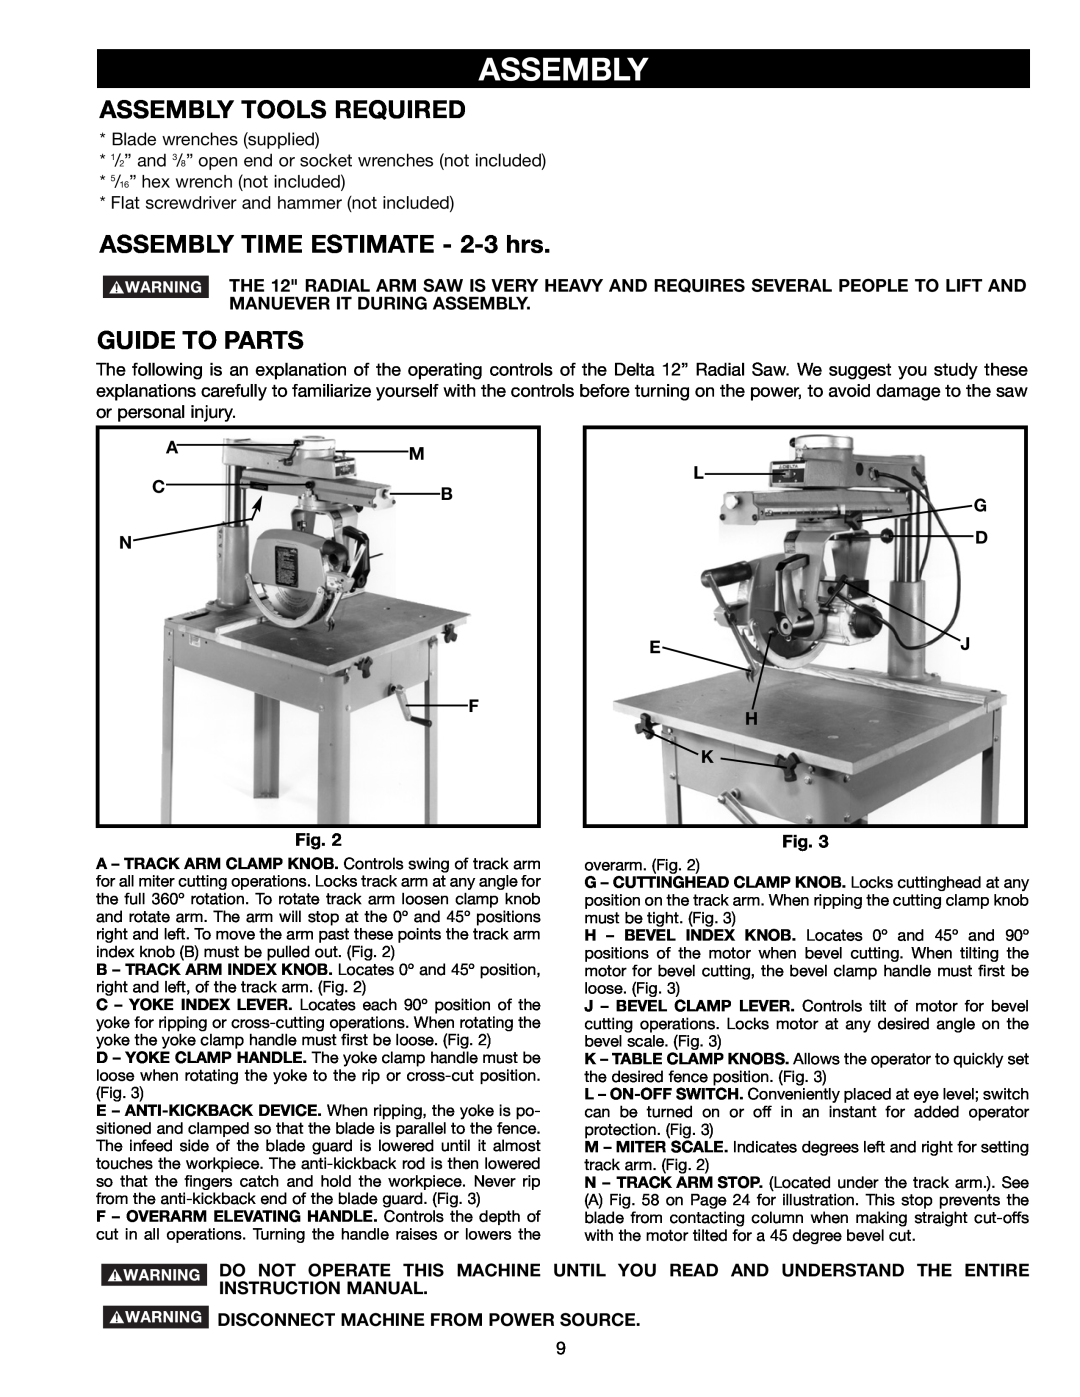 Porter-Cable 33-890 Assembly Tools Required, ASSEMBLY TIME ESTIMATE - 2-3 hrs, Guide To Parts, Am Cb N F, L G D Ej H K 